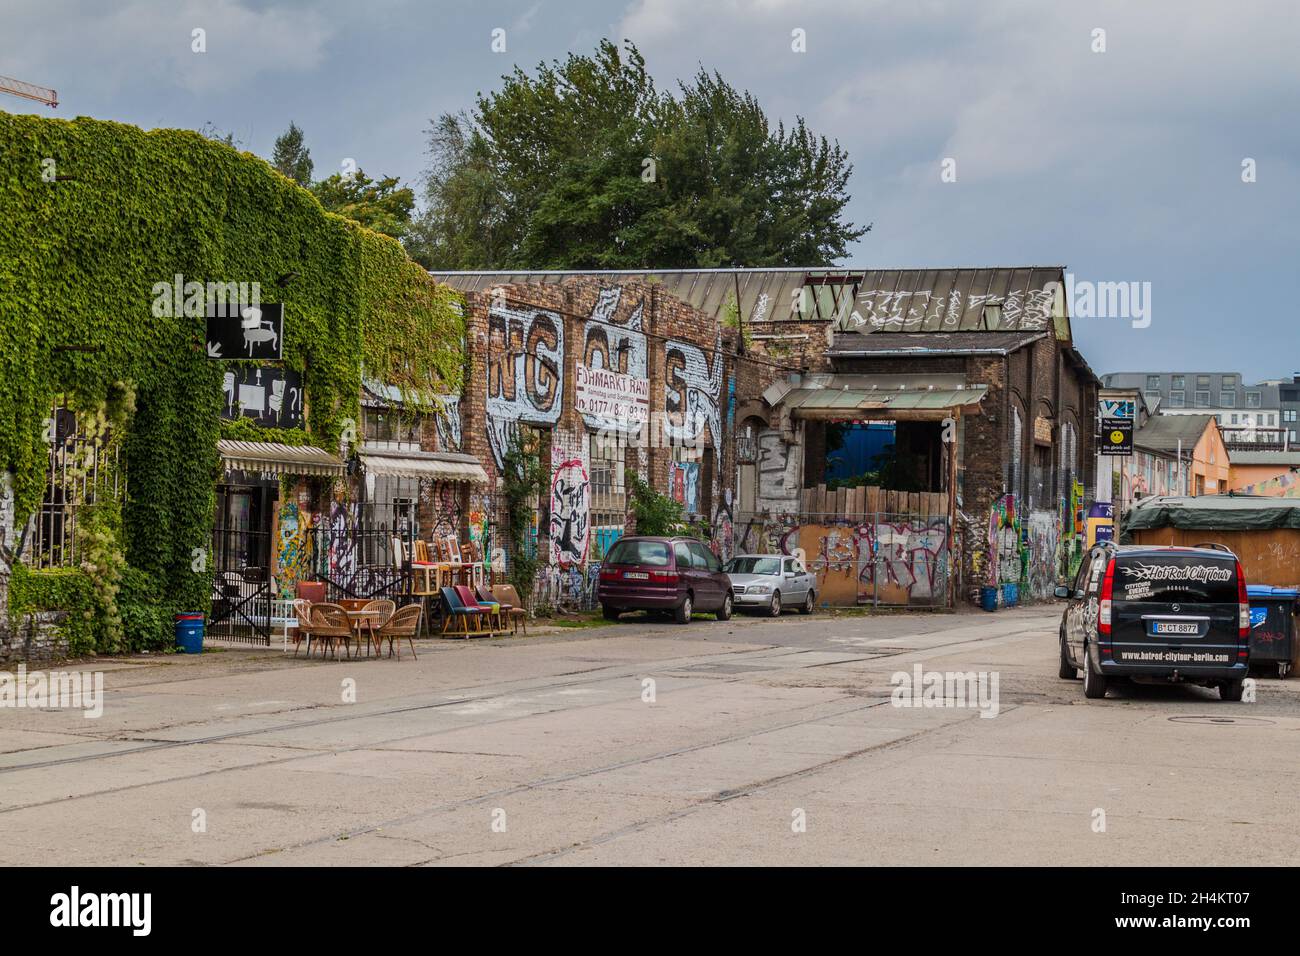 BERLIN, GERMANY - SEPTEMBER 1, 2017: View of RAW Gelande subcultural compound in Berlin. Stock Photo